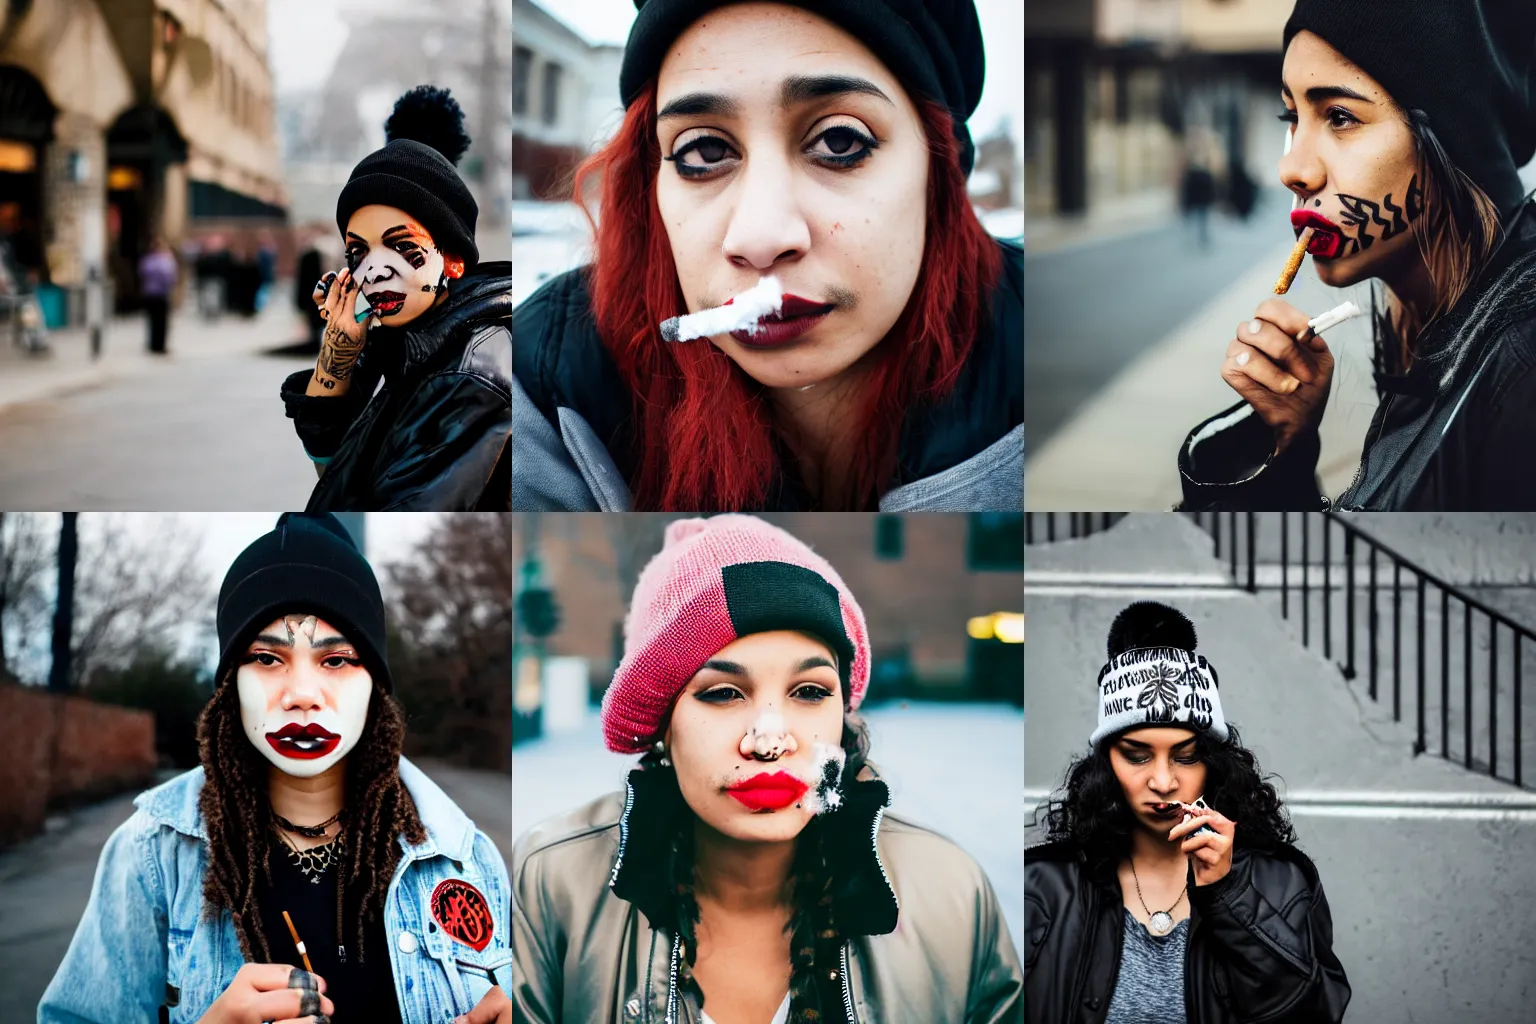 Image similar to portrait of a mixed woman smoking a cigarette, face tattoos, black beanie, black bomber jacket, urban environment, depth of field